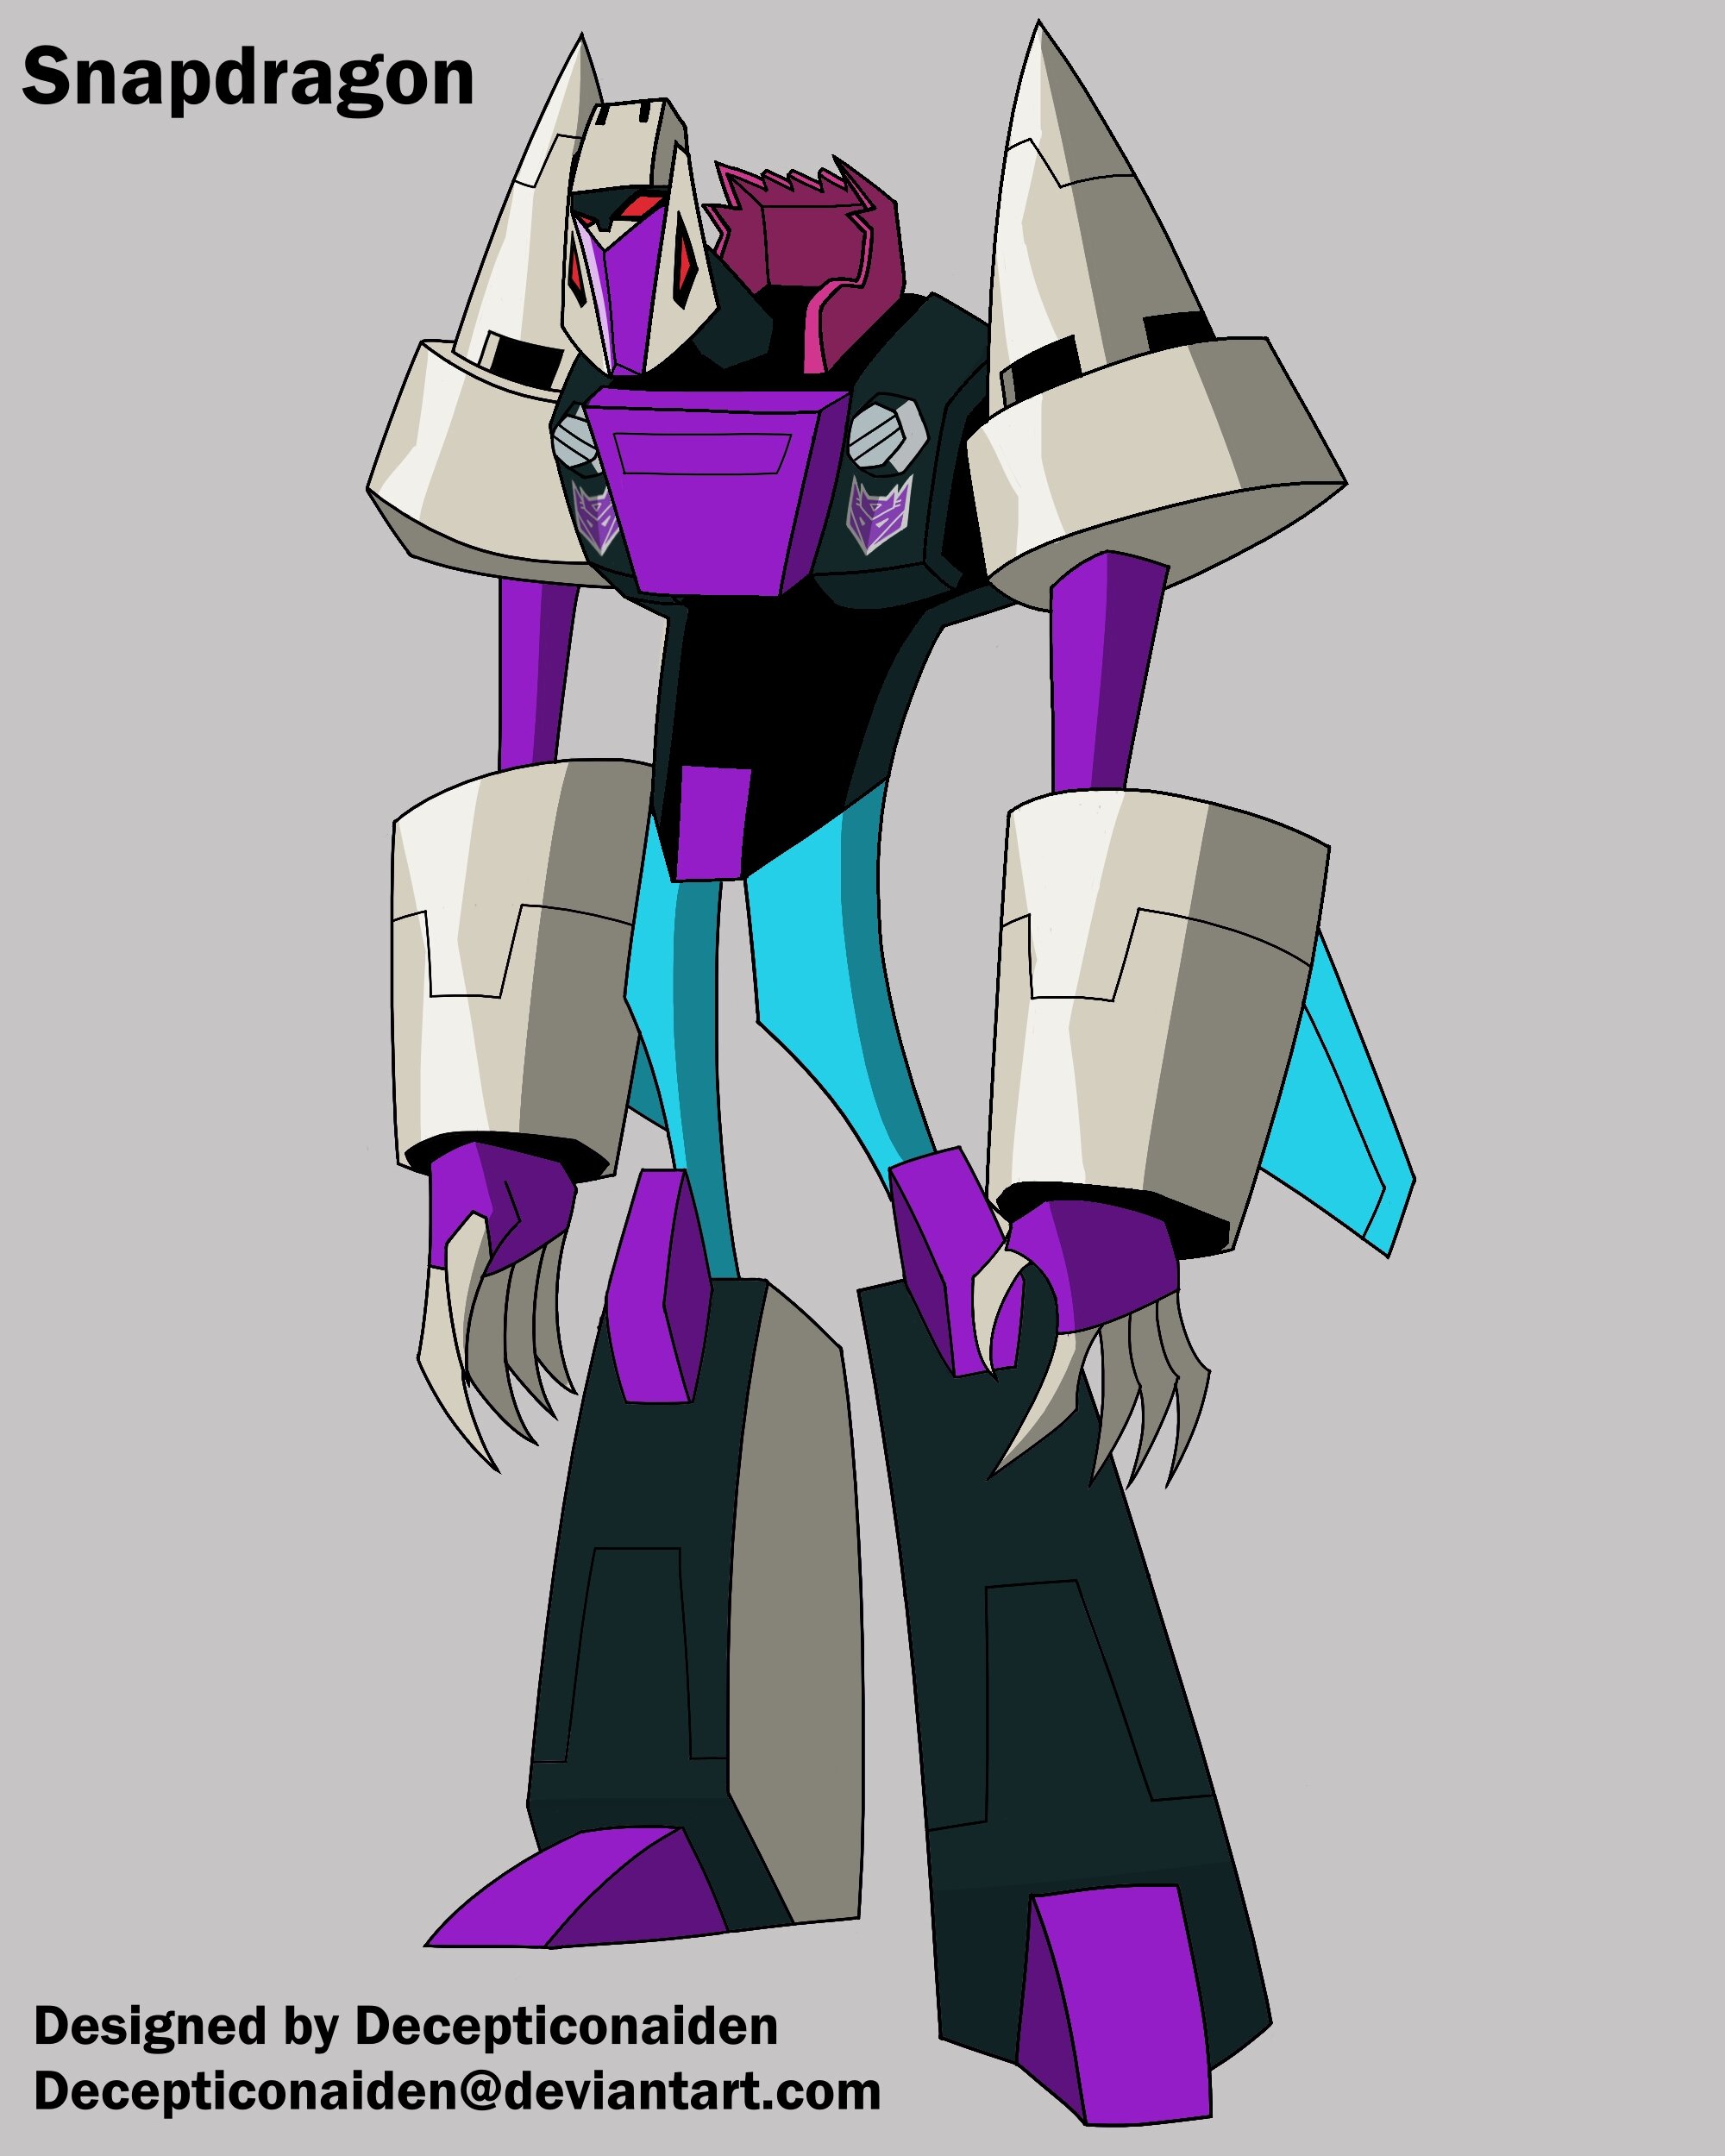 Transformers Animated Horrorcons - Artwork - The TTV Message Boards